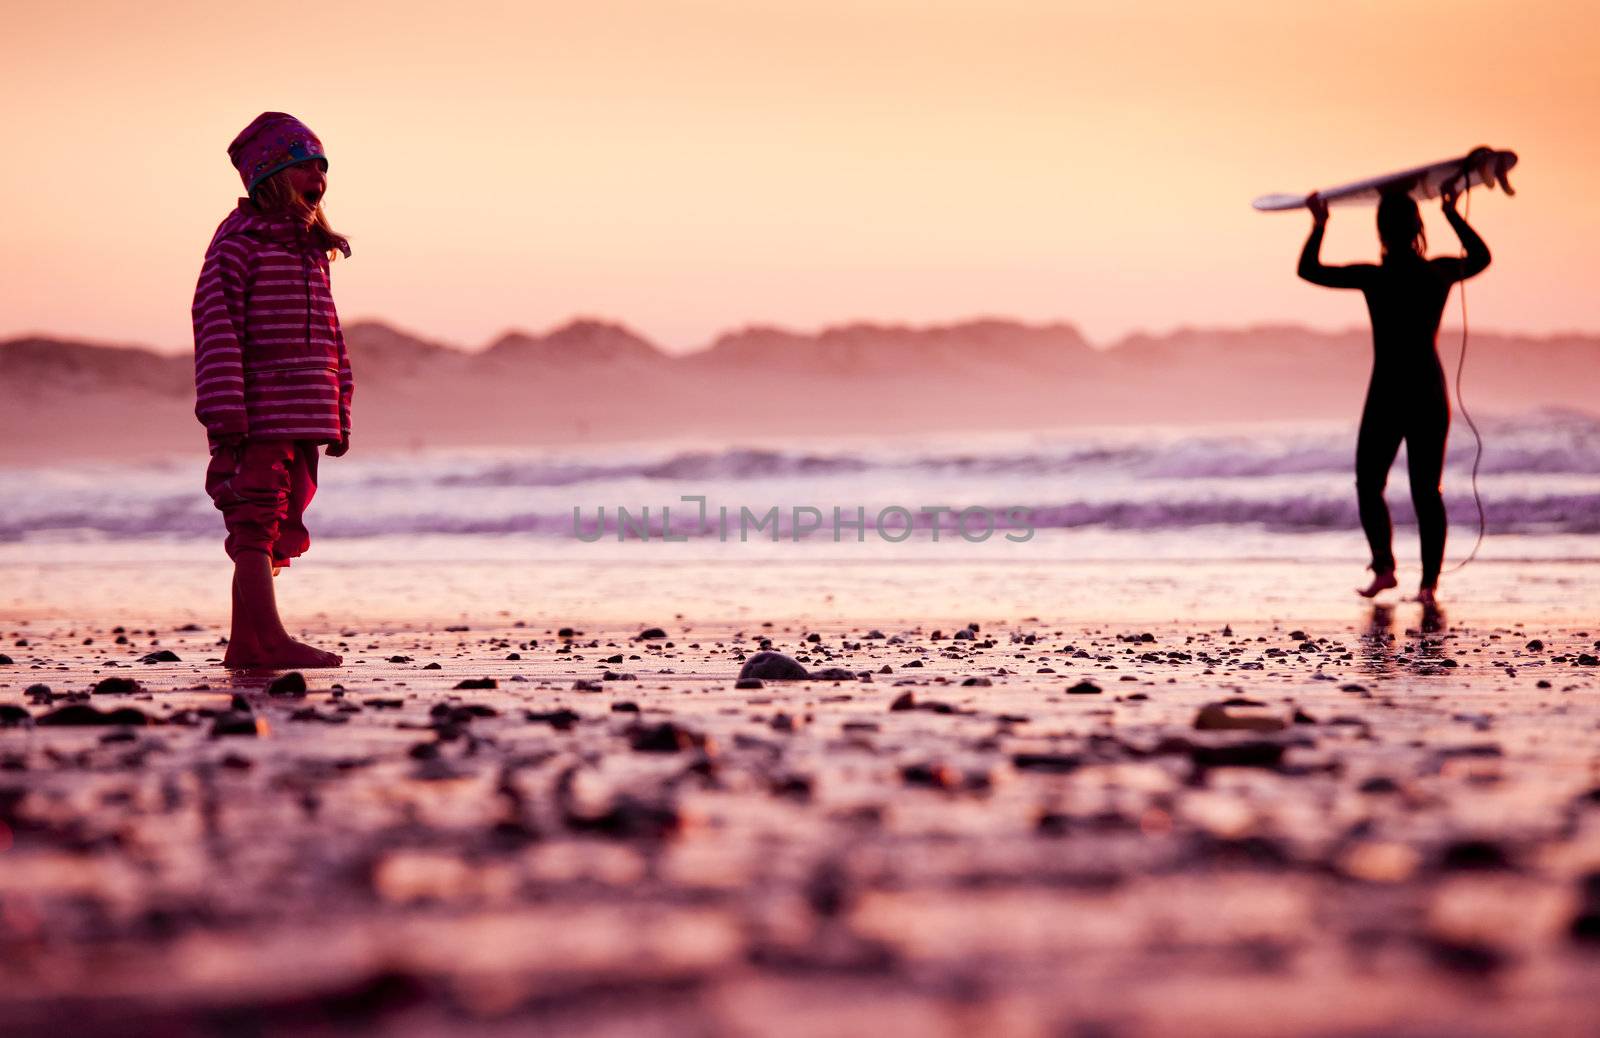 Little girl standing in the beach looking to the ocean